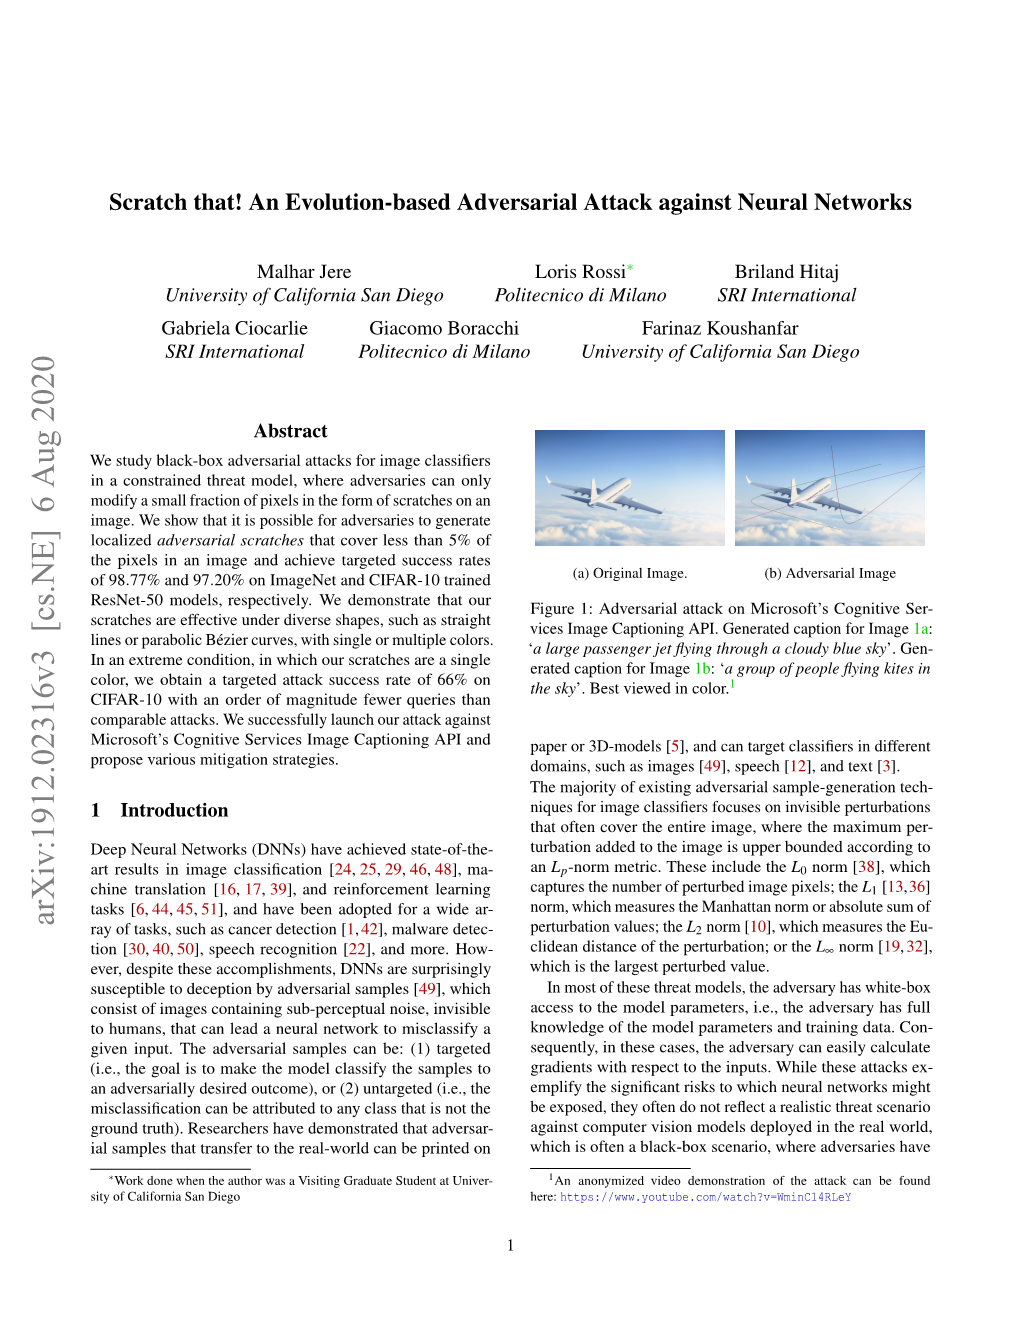 Scratch That! an Evolution-Based Adversarial Attack Against Neural Networks